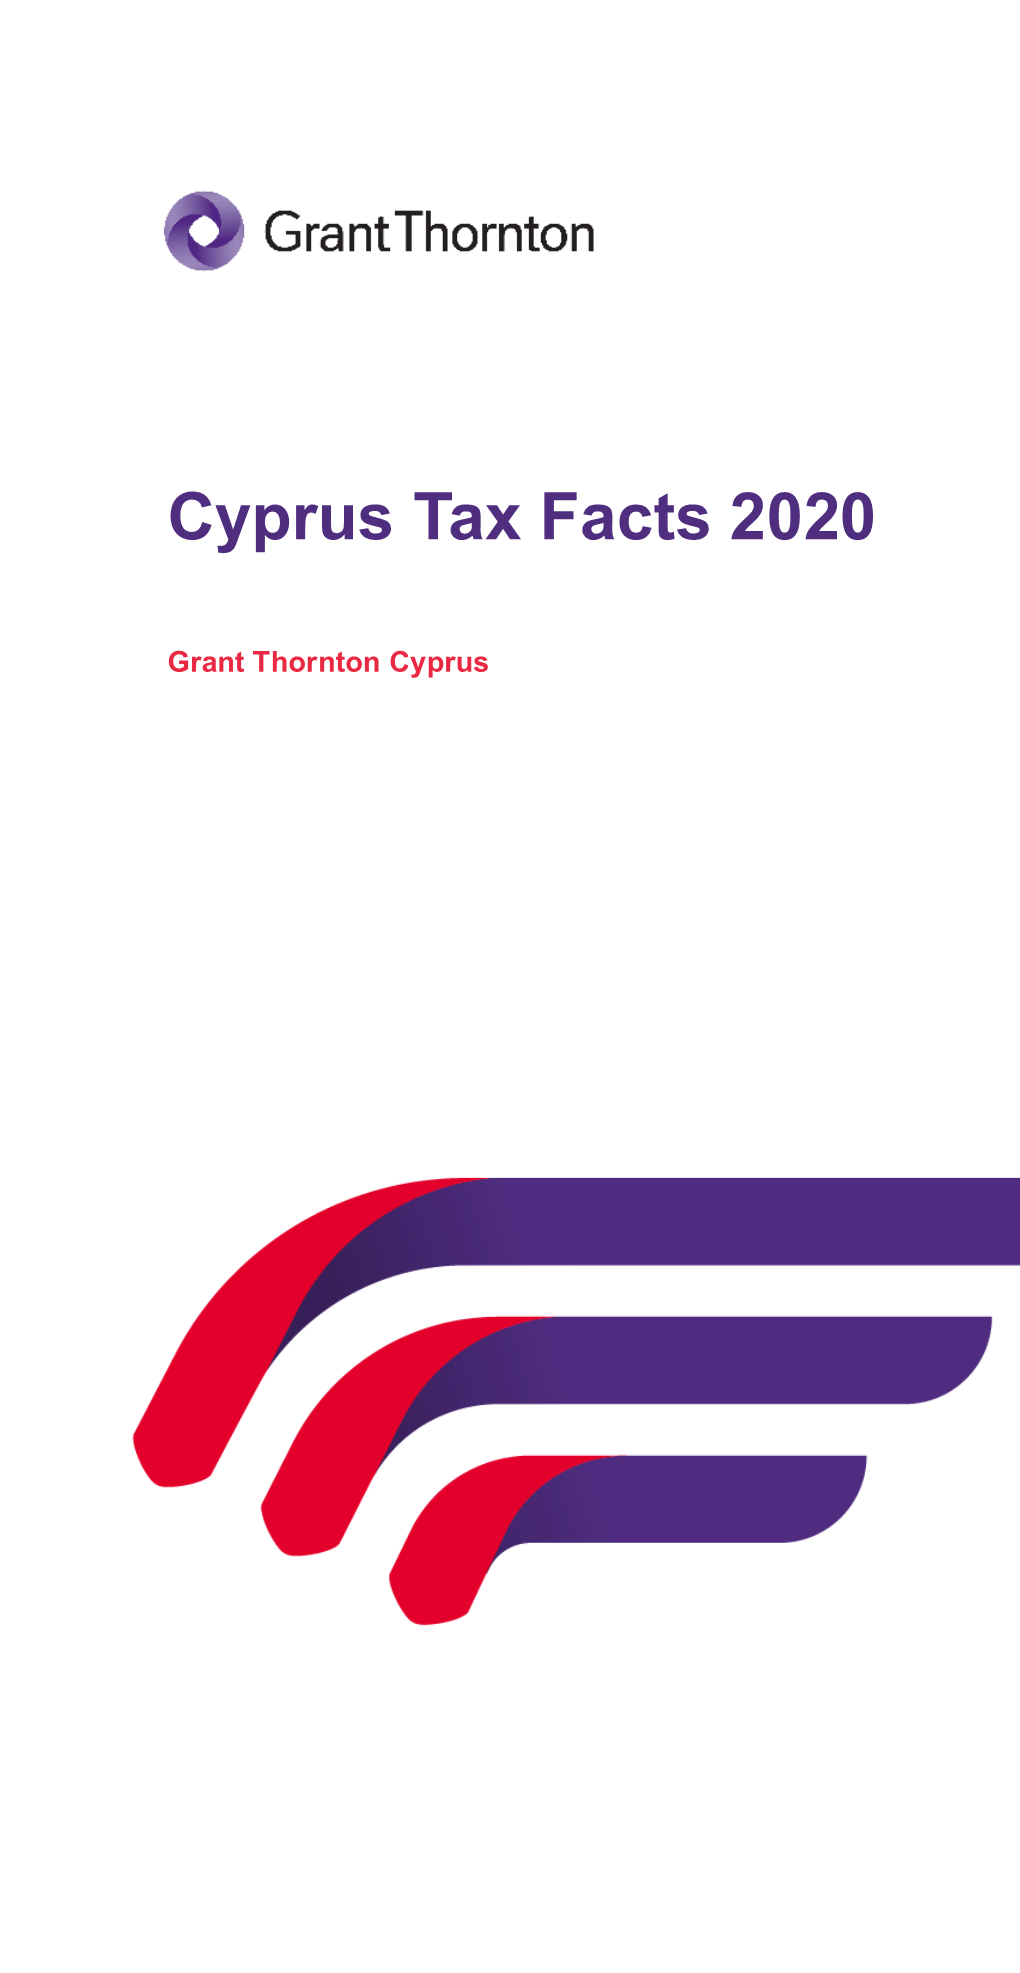 Cyprus Tax Facts 2020